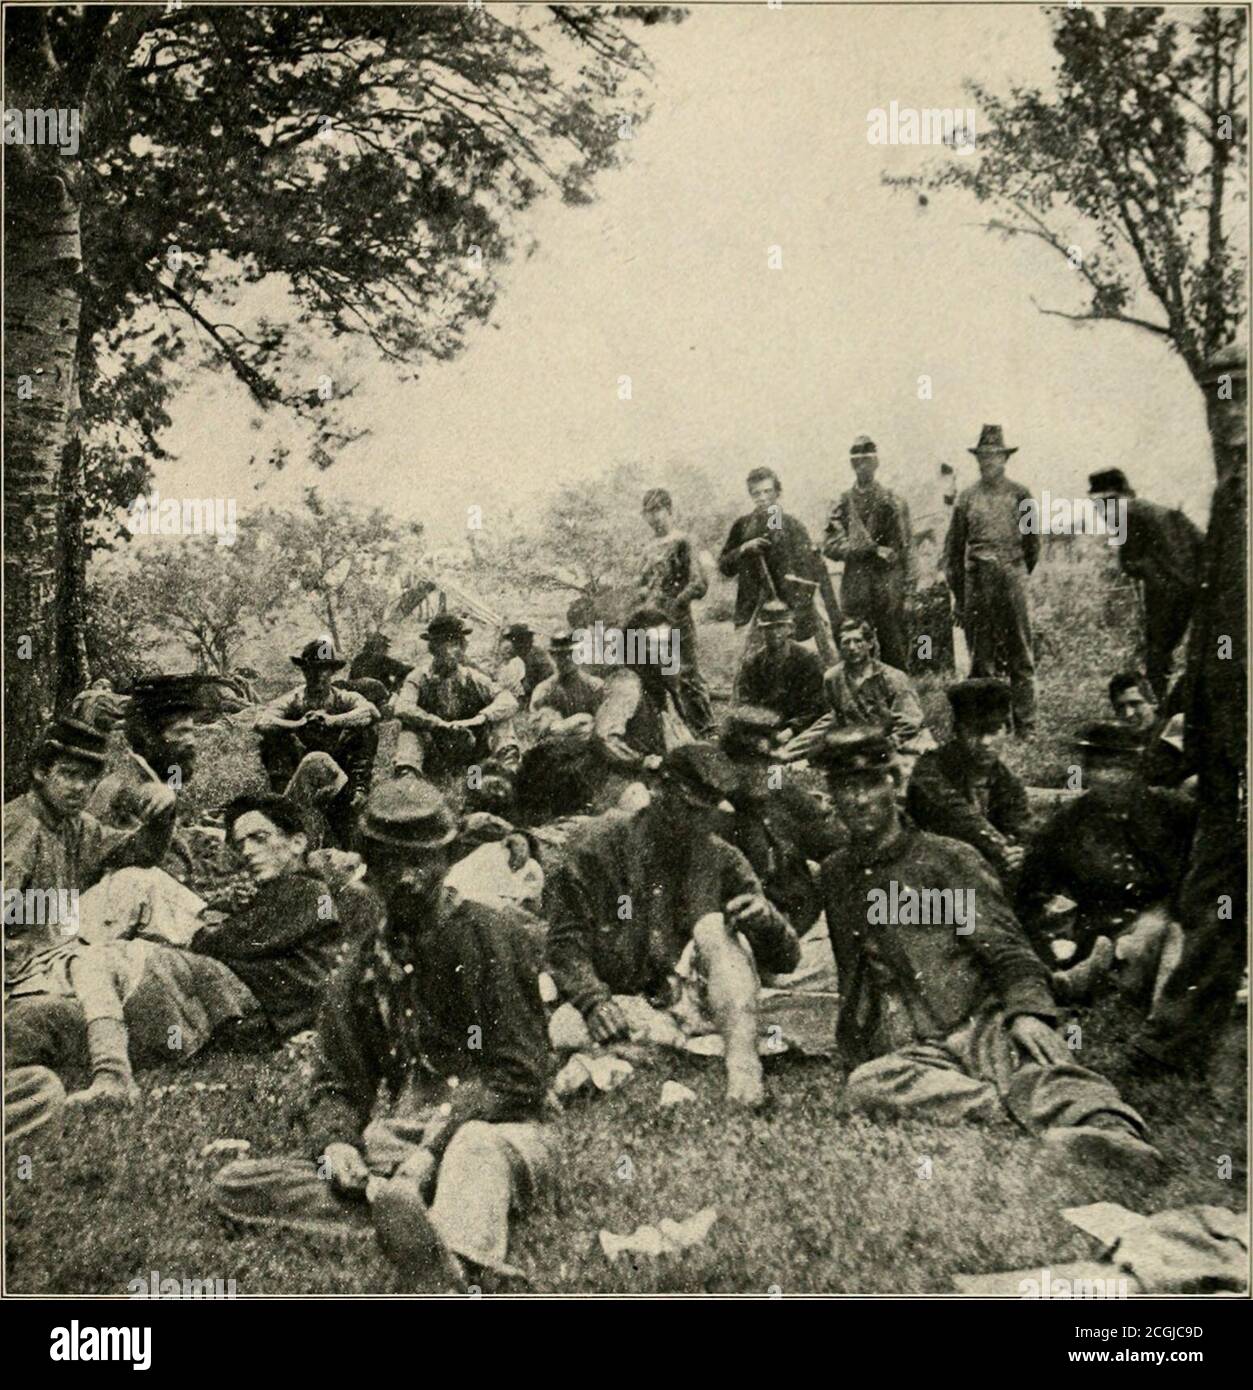 . The Photographic history of the Civil War : thousands of scenes photographed 1861-65, with text by many special authorities . WHERE BLUE AND GRAY WERE CARED FOR ALIKE—AFTER SPOTSYLYANTA In the battle of Spotsylvania, May 12, 1864, General Edward Johnsons division of seven thousand menwere taken prisoners at the salient known as Bloody Angle. Some of the wounded prisoners were plaeedin the same field hospitals as the Federals, and treated by the Union surgeons. They were left on thefield as the army moved on, and a small Confederate cavalry force under Colonel Rosser rescued all whocould be i Stock Photo